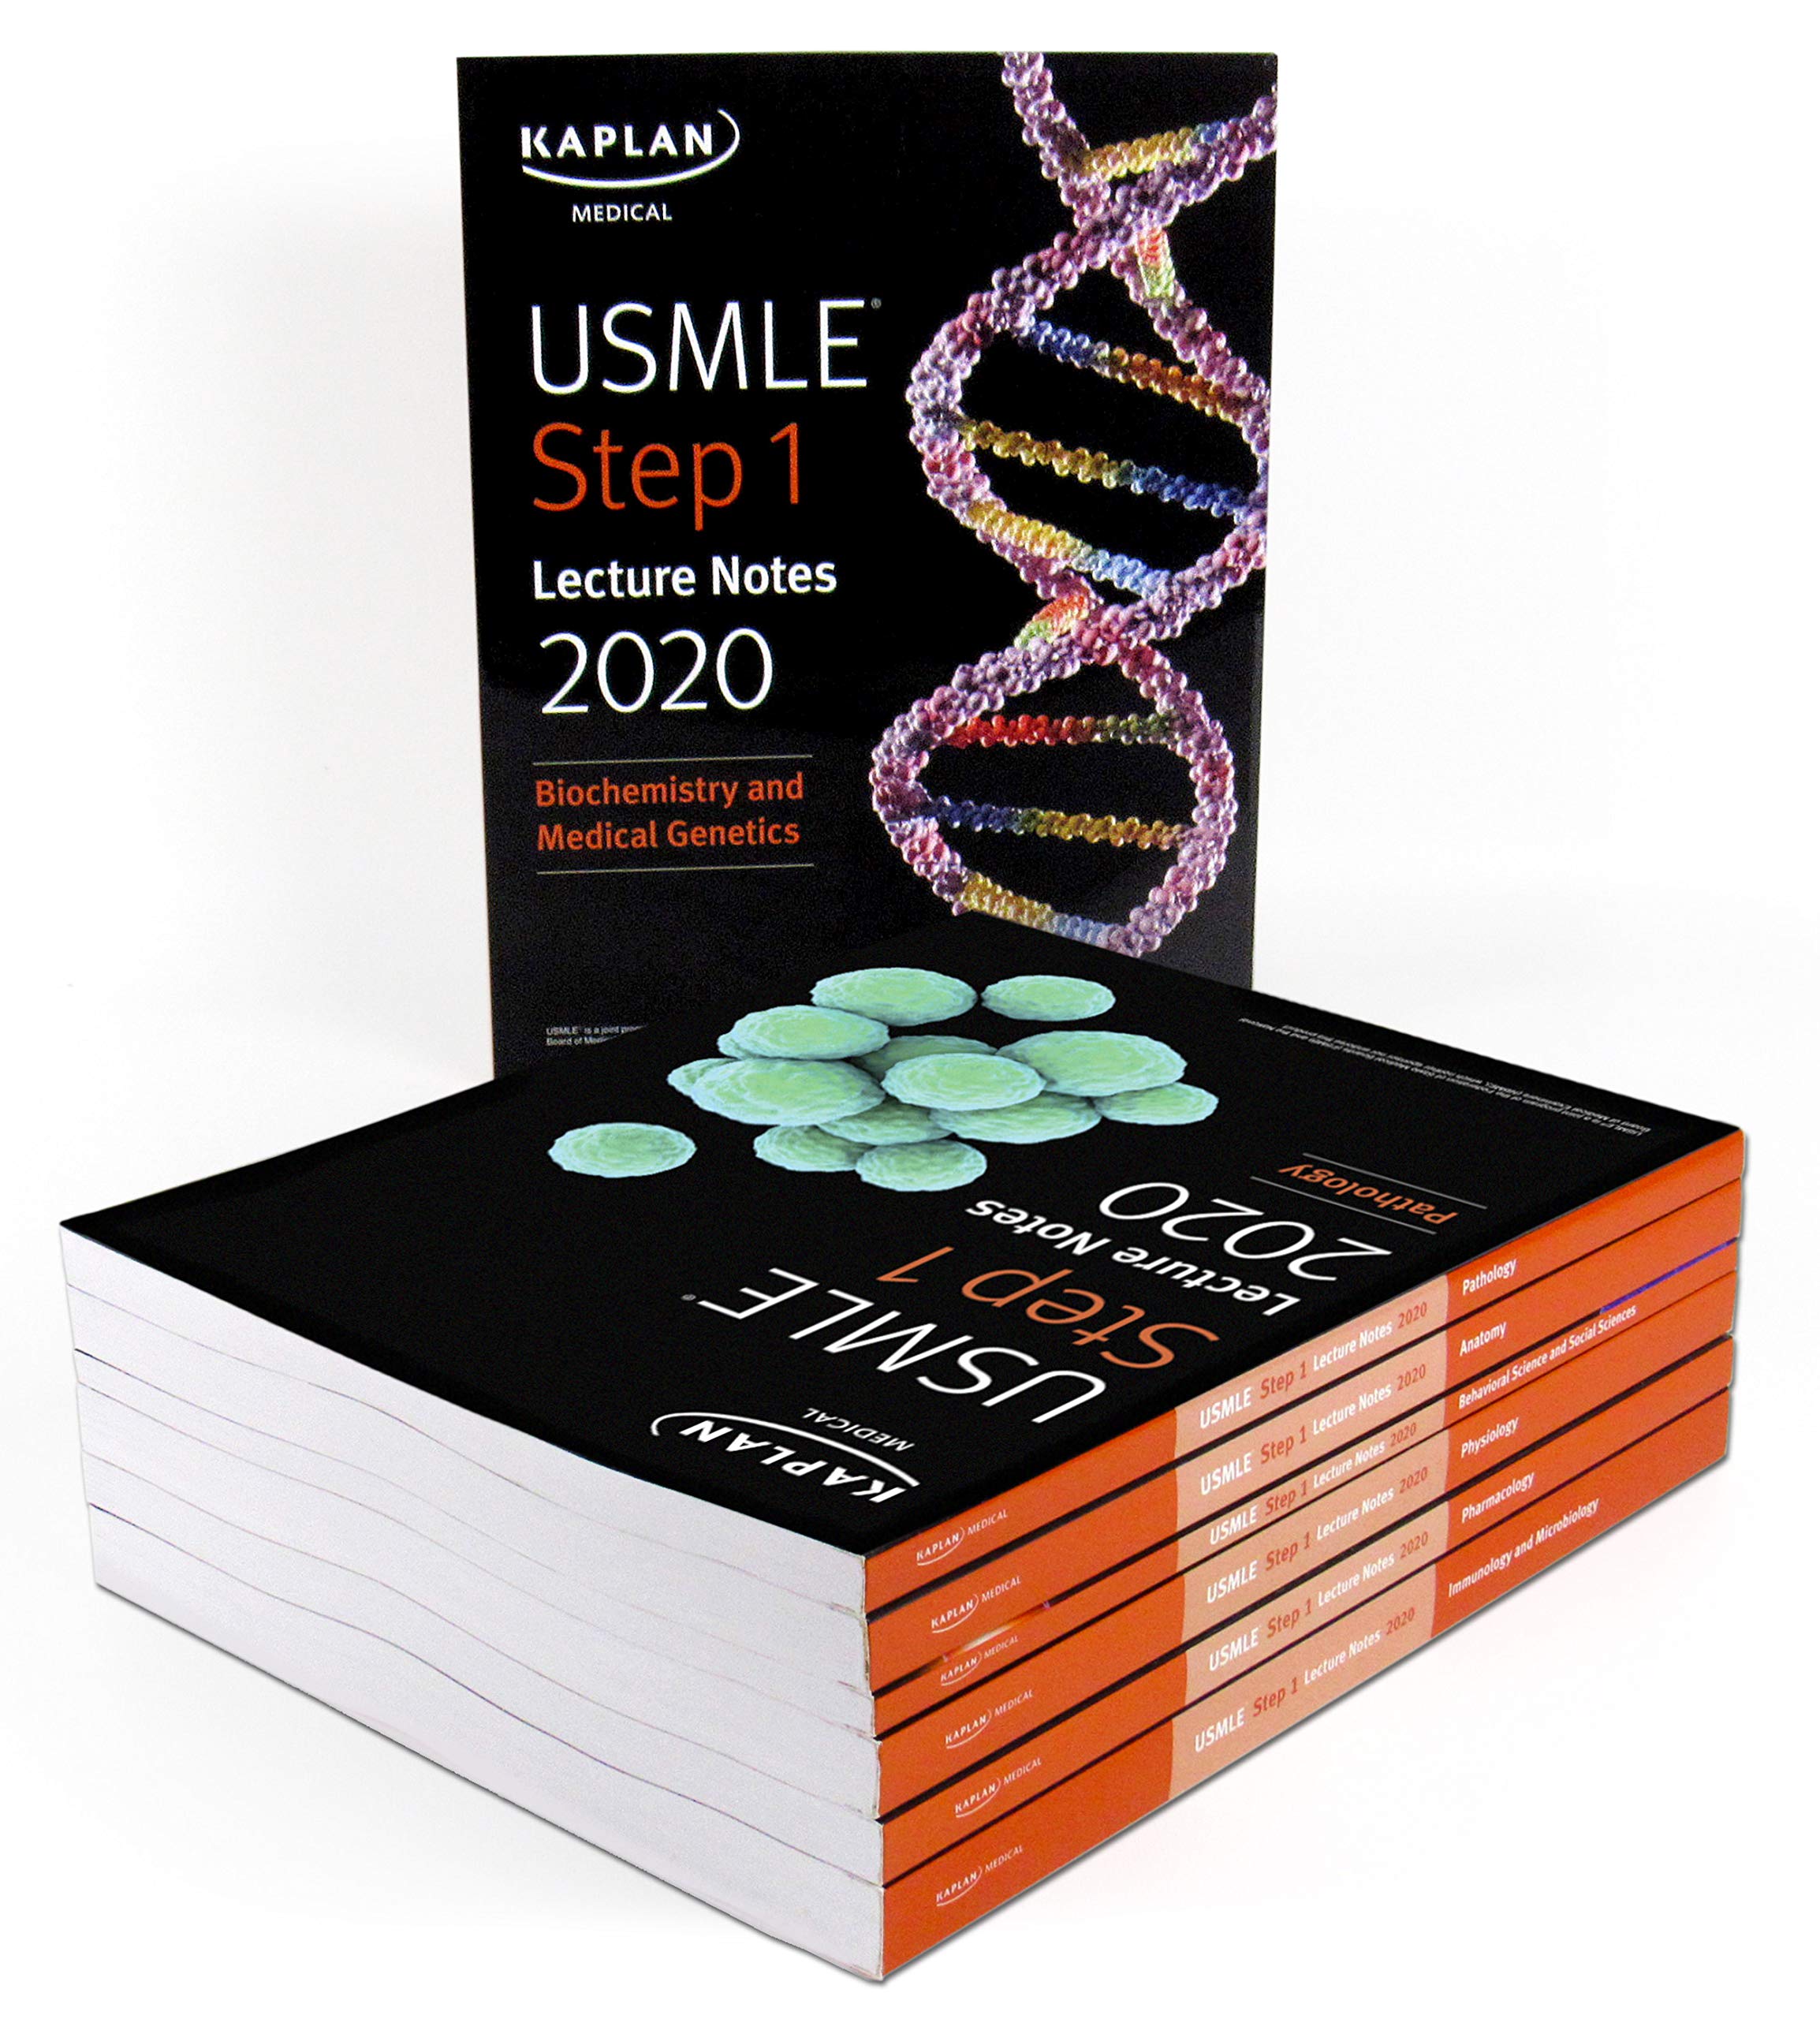 usmle-step-1-lecture-notes-2020-7-book-set